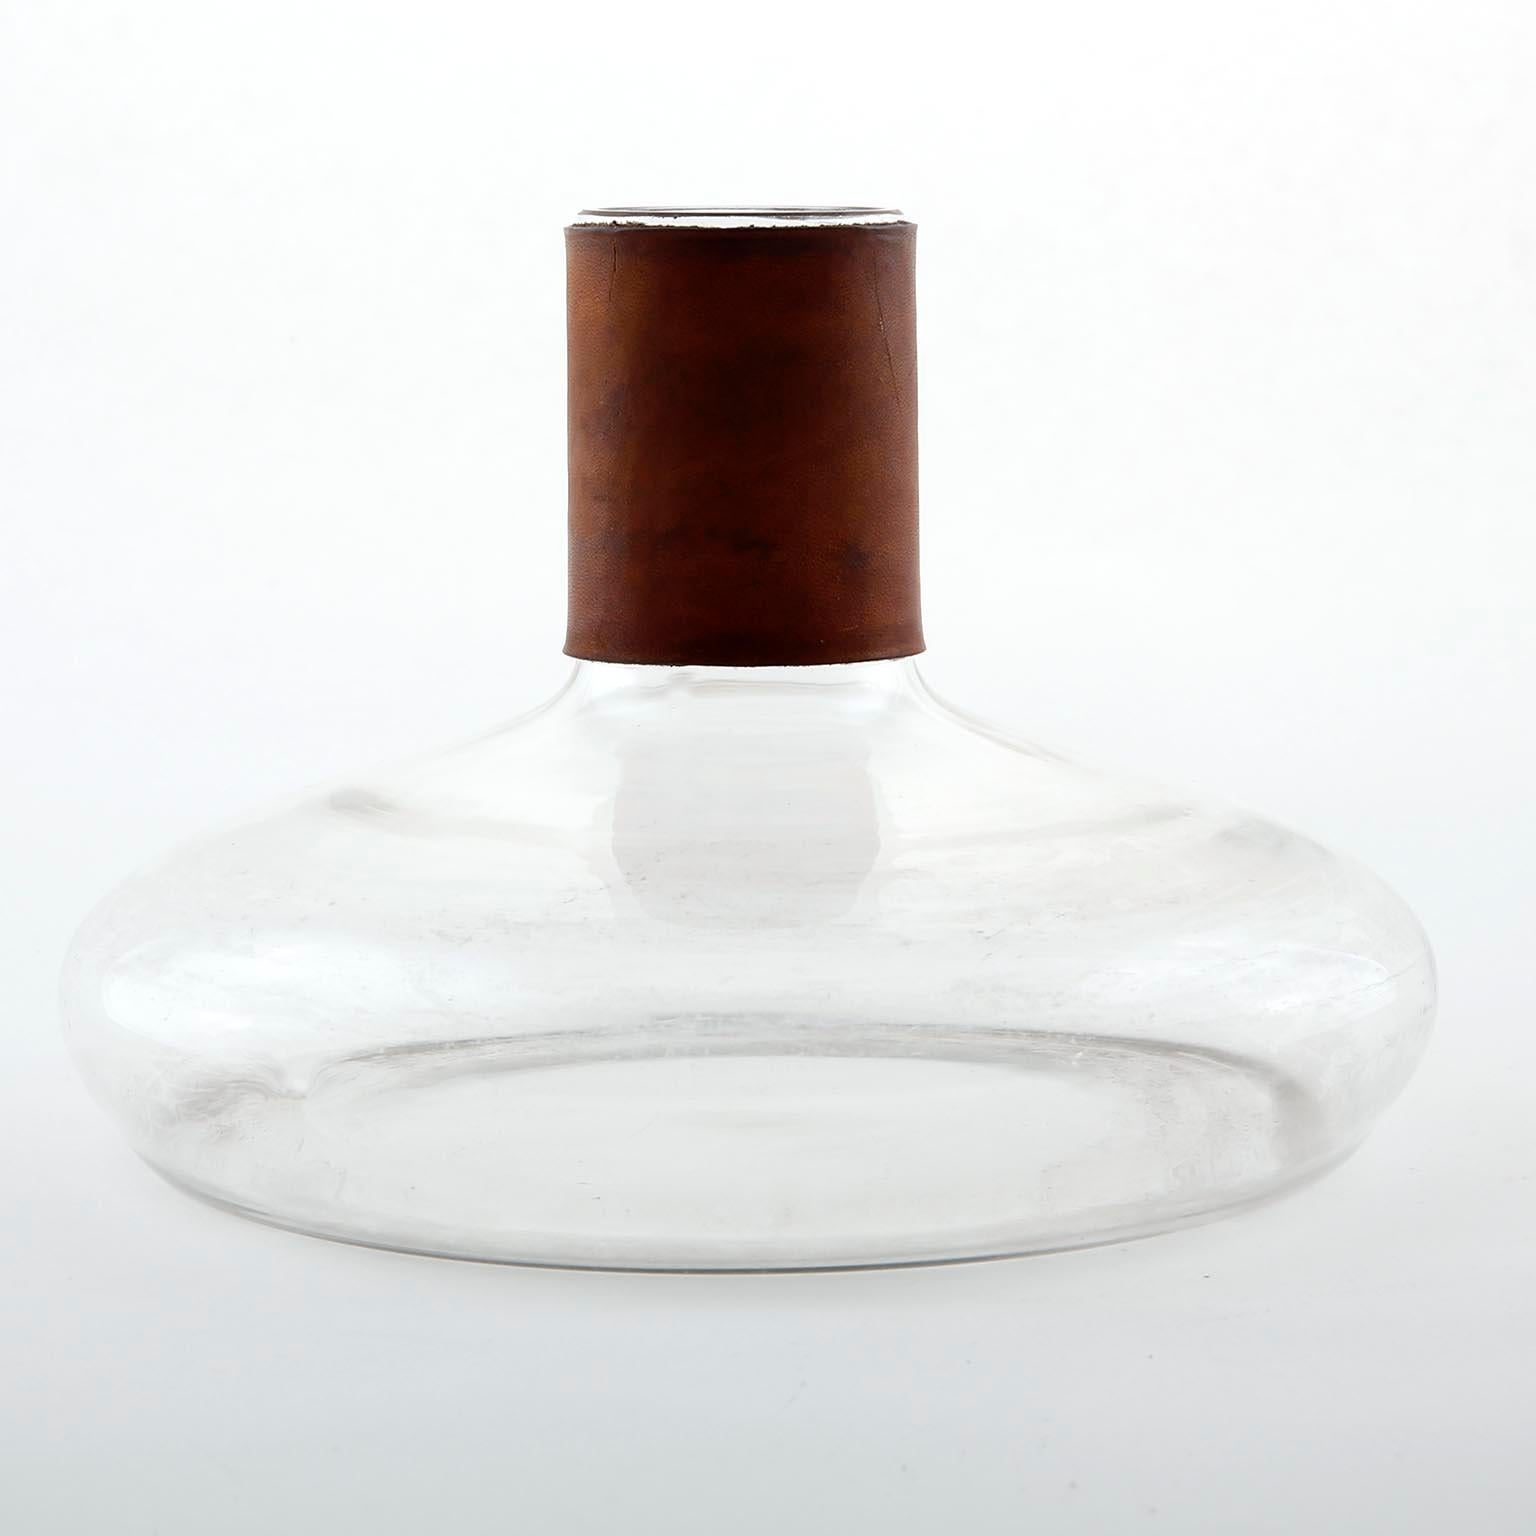 A decanter designed by Carl Auböck, manufactured by Carl Auböck workshop in midcentury, Vienna, circa 1950.
An authentic handmade piece in very good original condition.

Carl Auböck, Carl Auboeck, Carl Auböck.